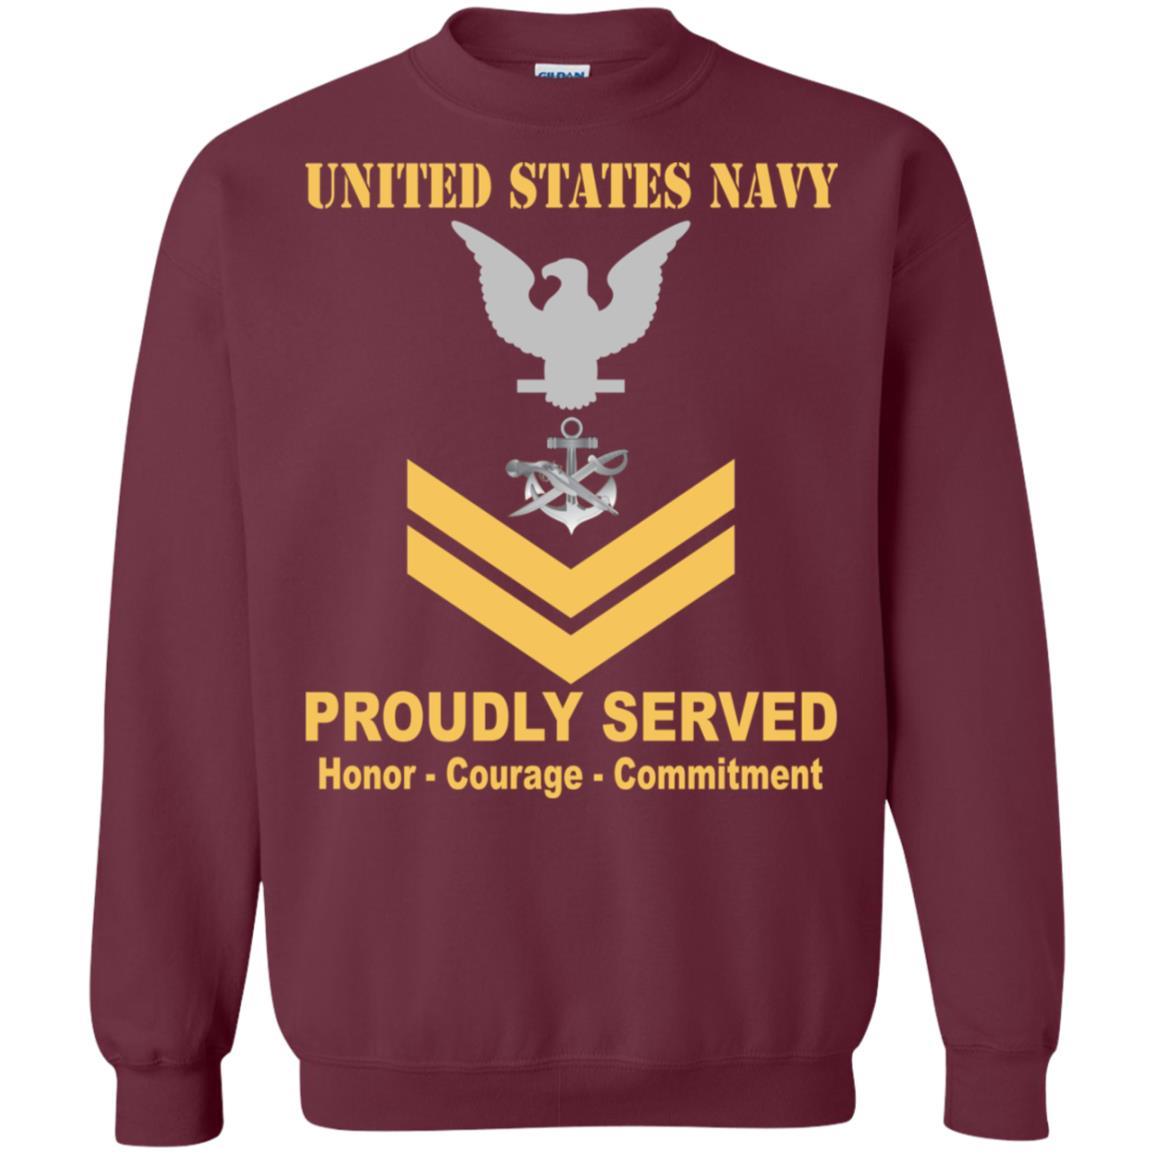 Navy Special Warfare Boat Operator Navy SB E-5 Rating Badges Proudly Served T-Shirt For Men On Front-TShirt-Navy-Veterans Nation